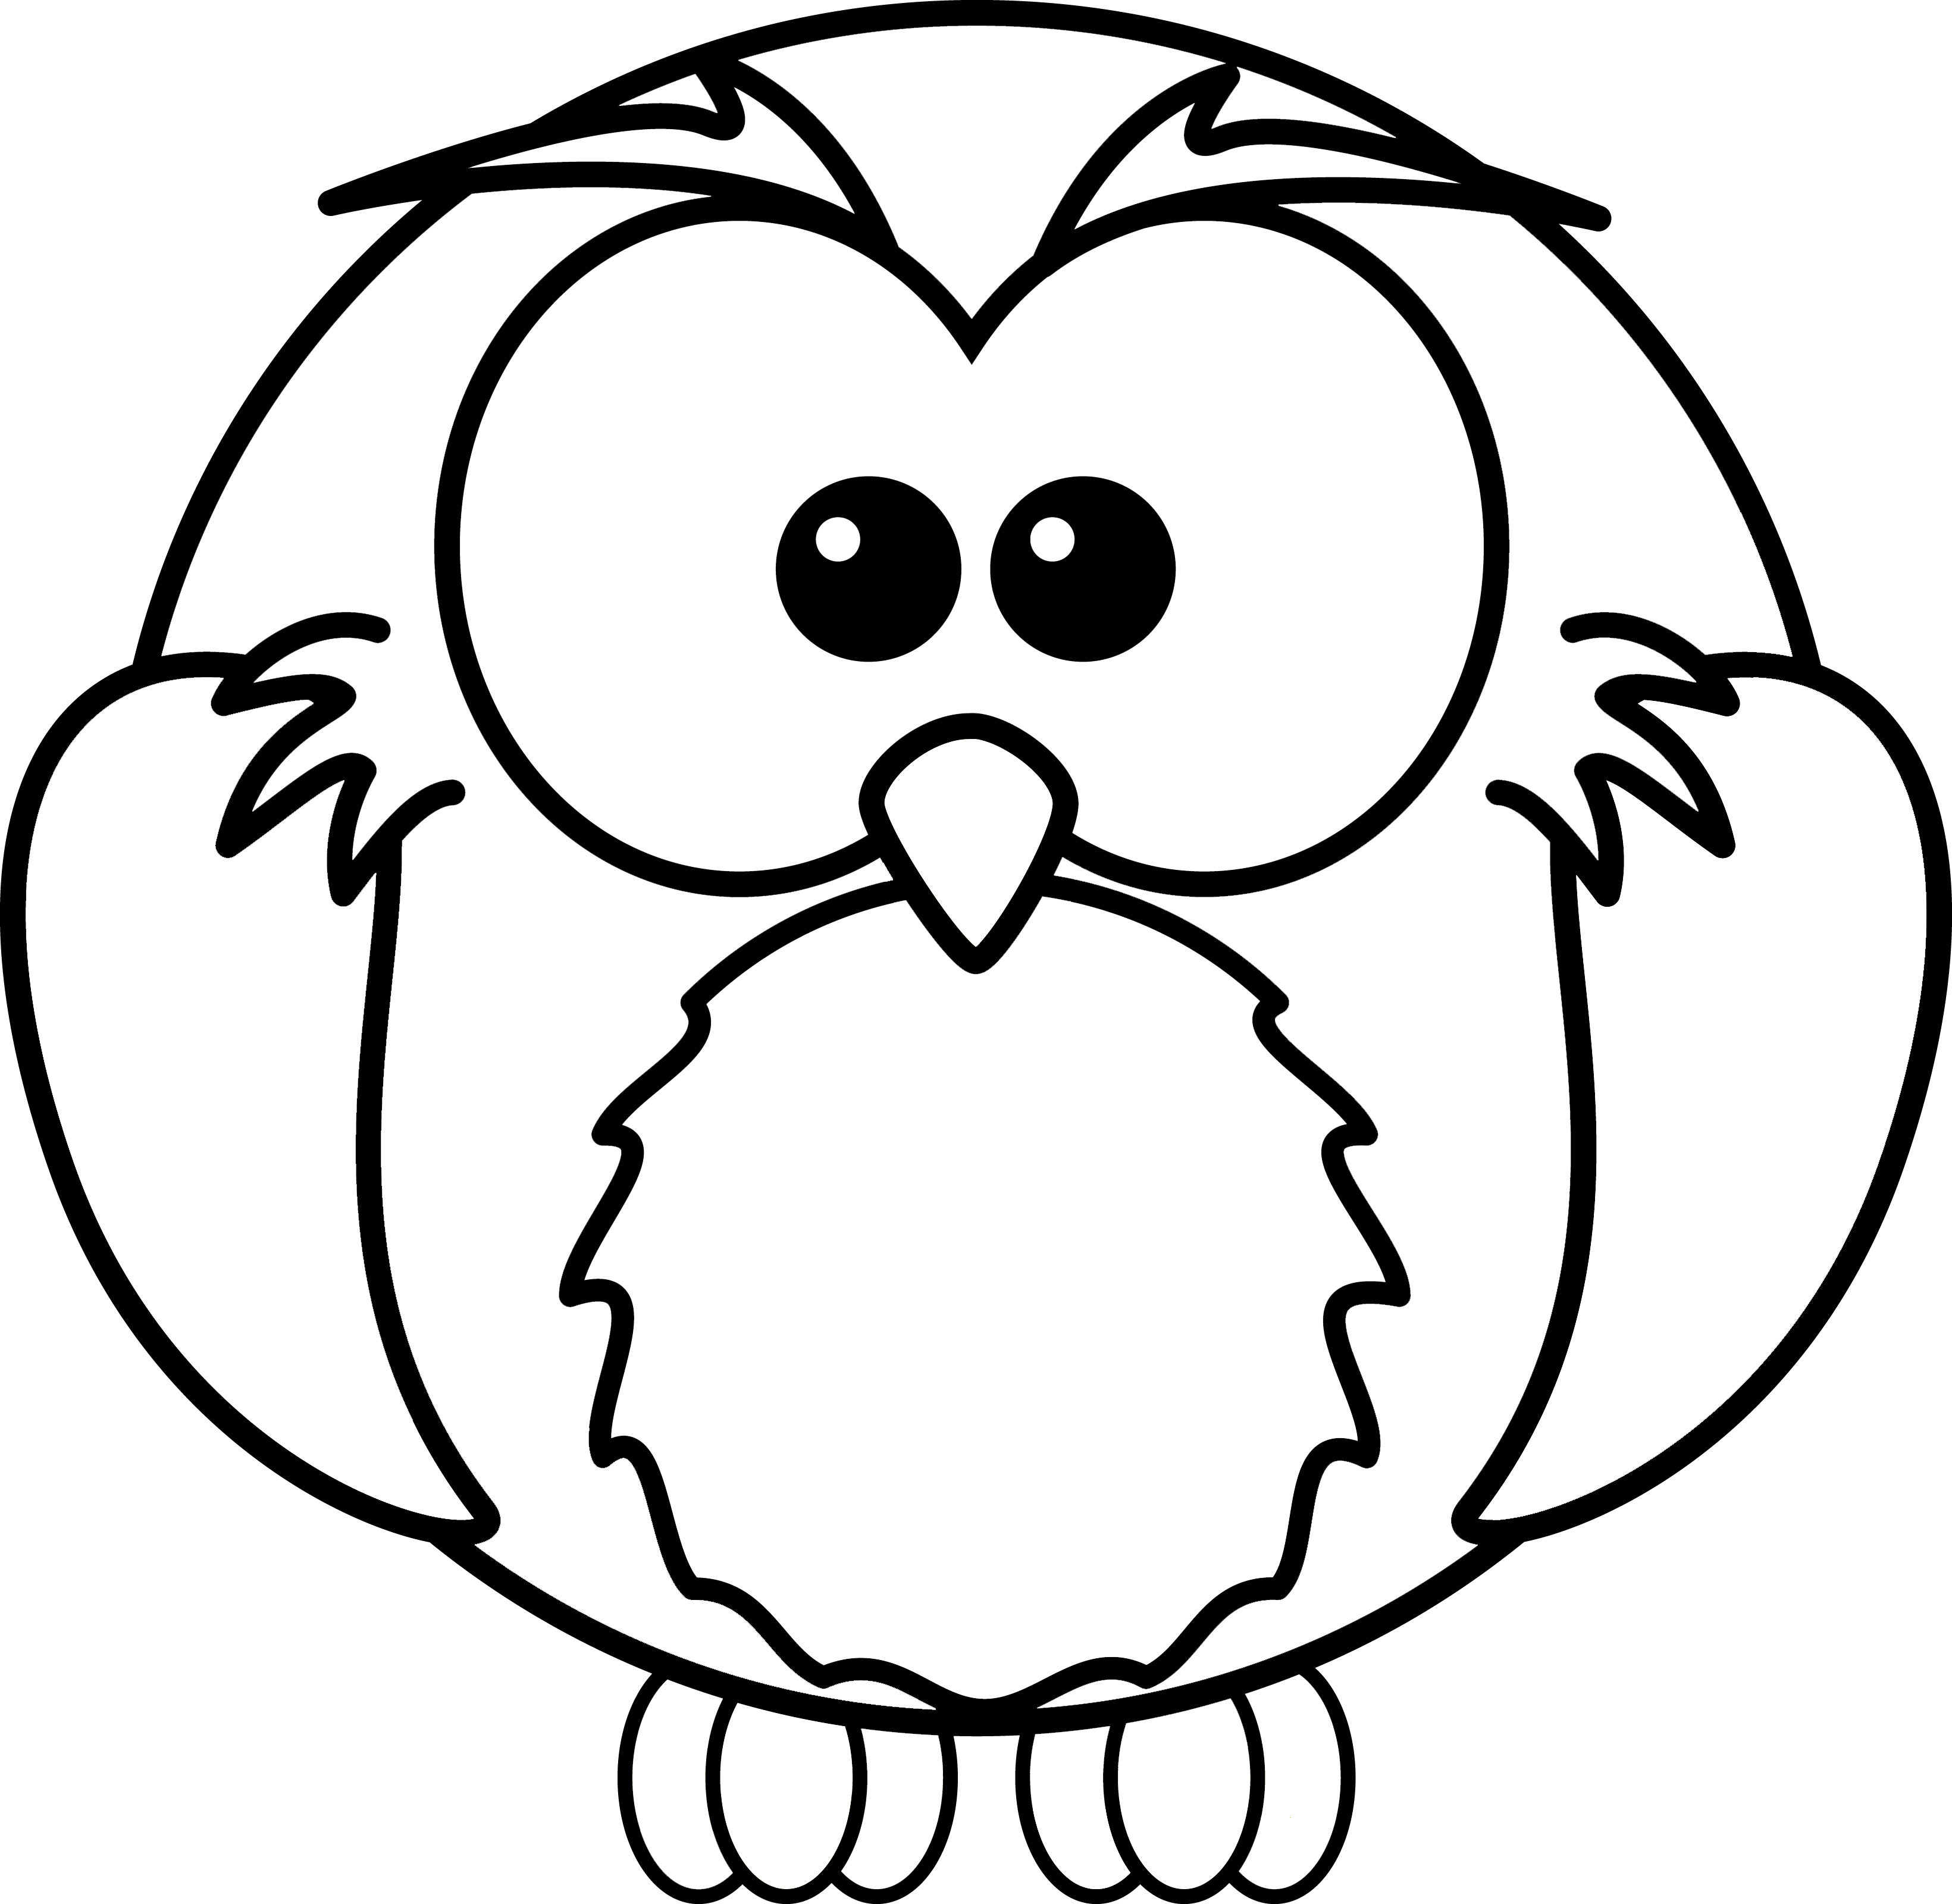 Coloring Pages For Owls 1